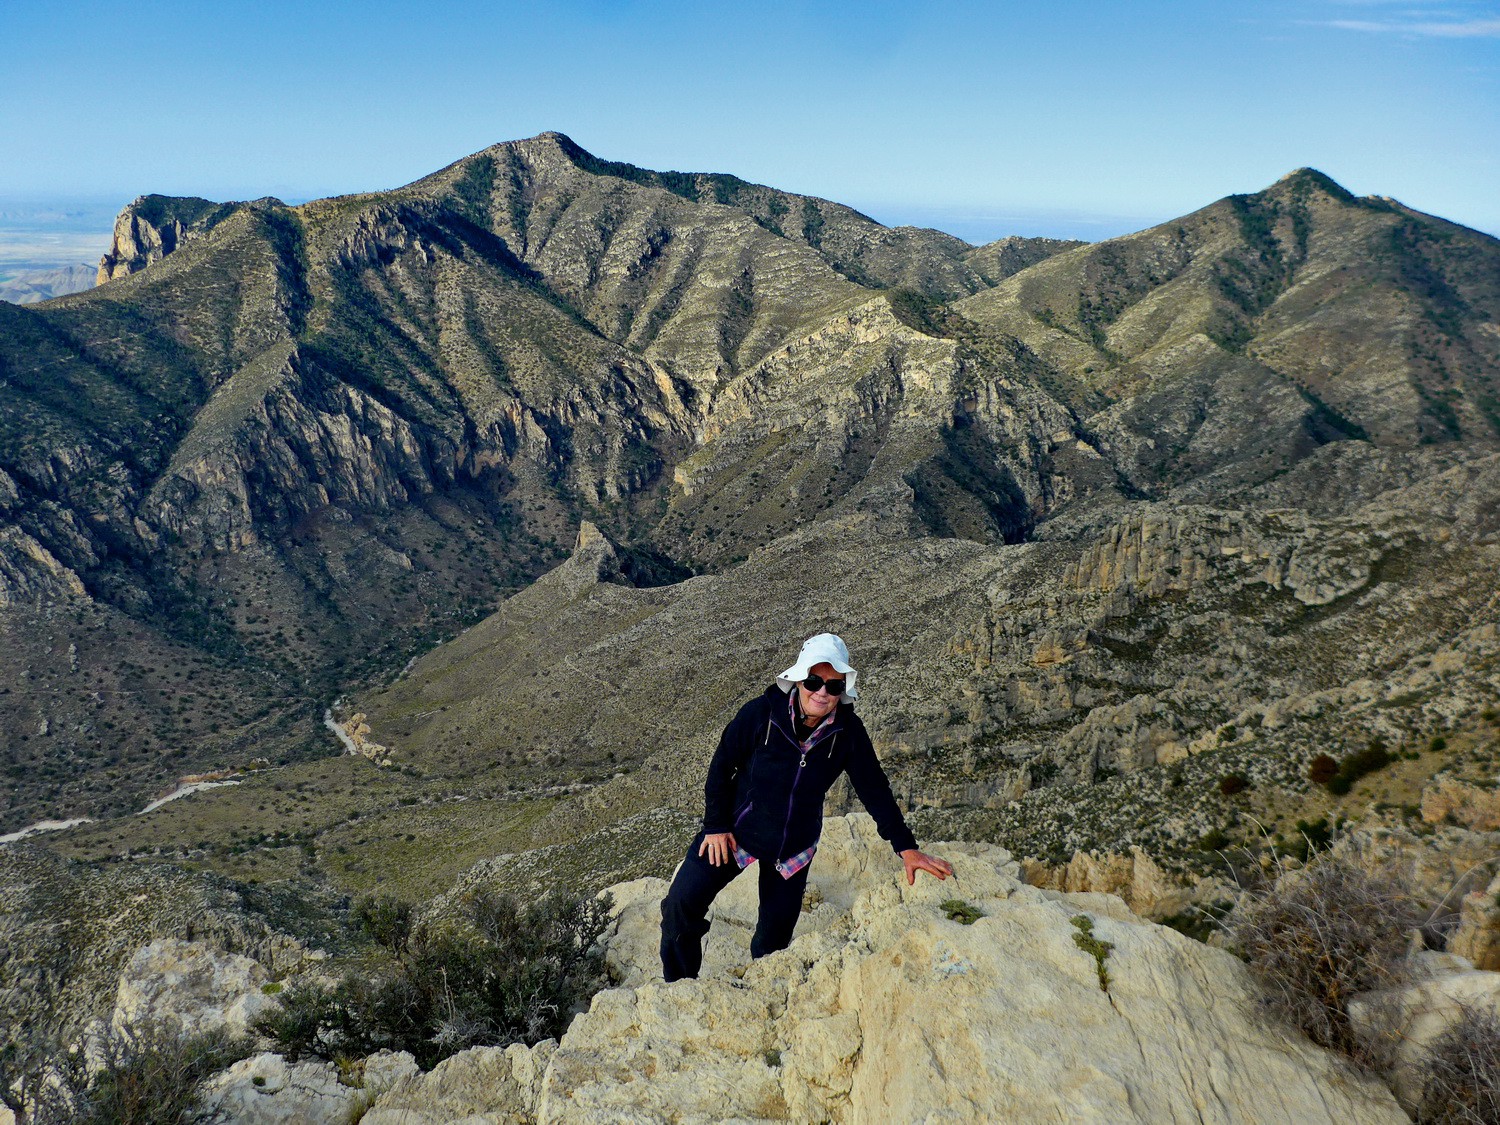 Marion on top of 2550 meters high Hunter Peak with Guadalupe Peak in the background